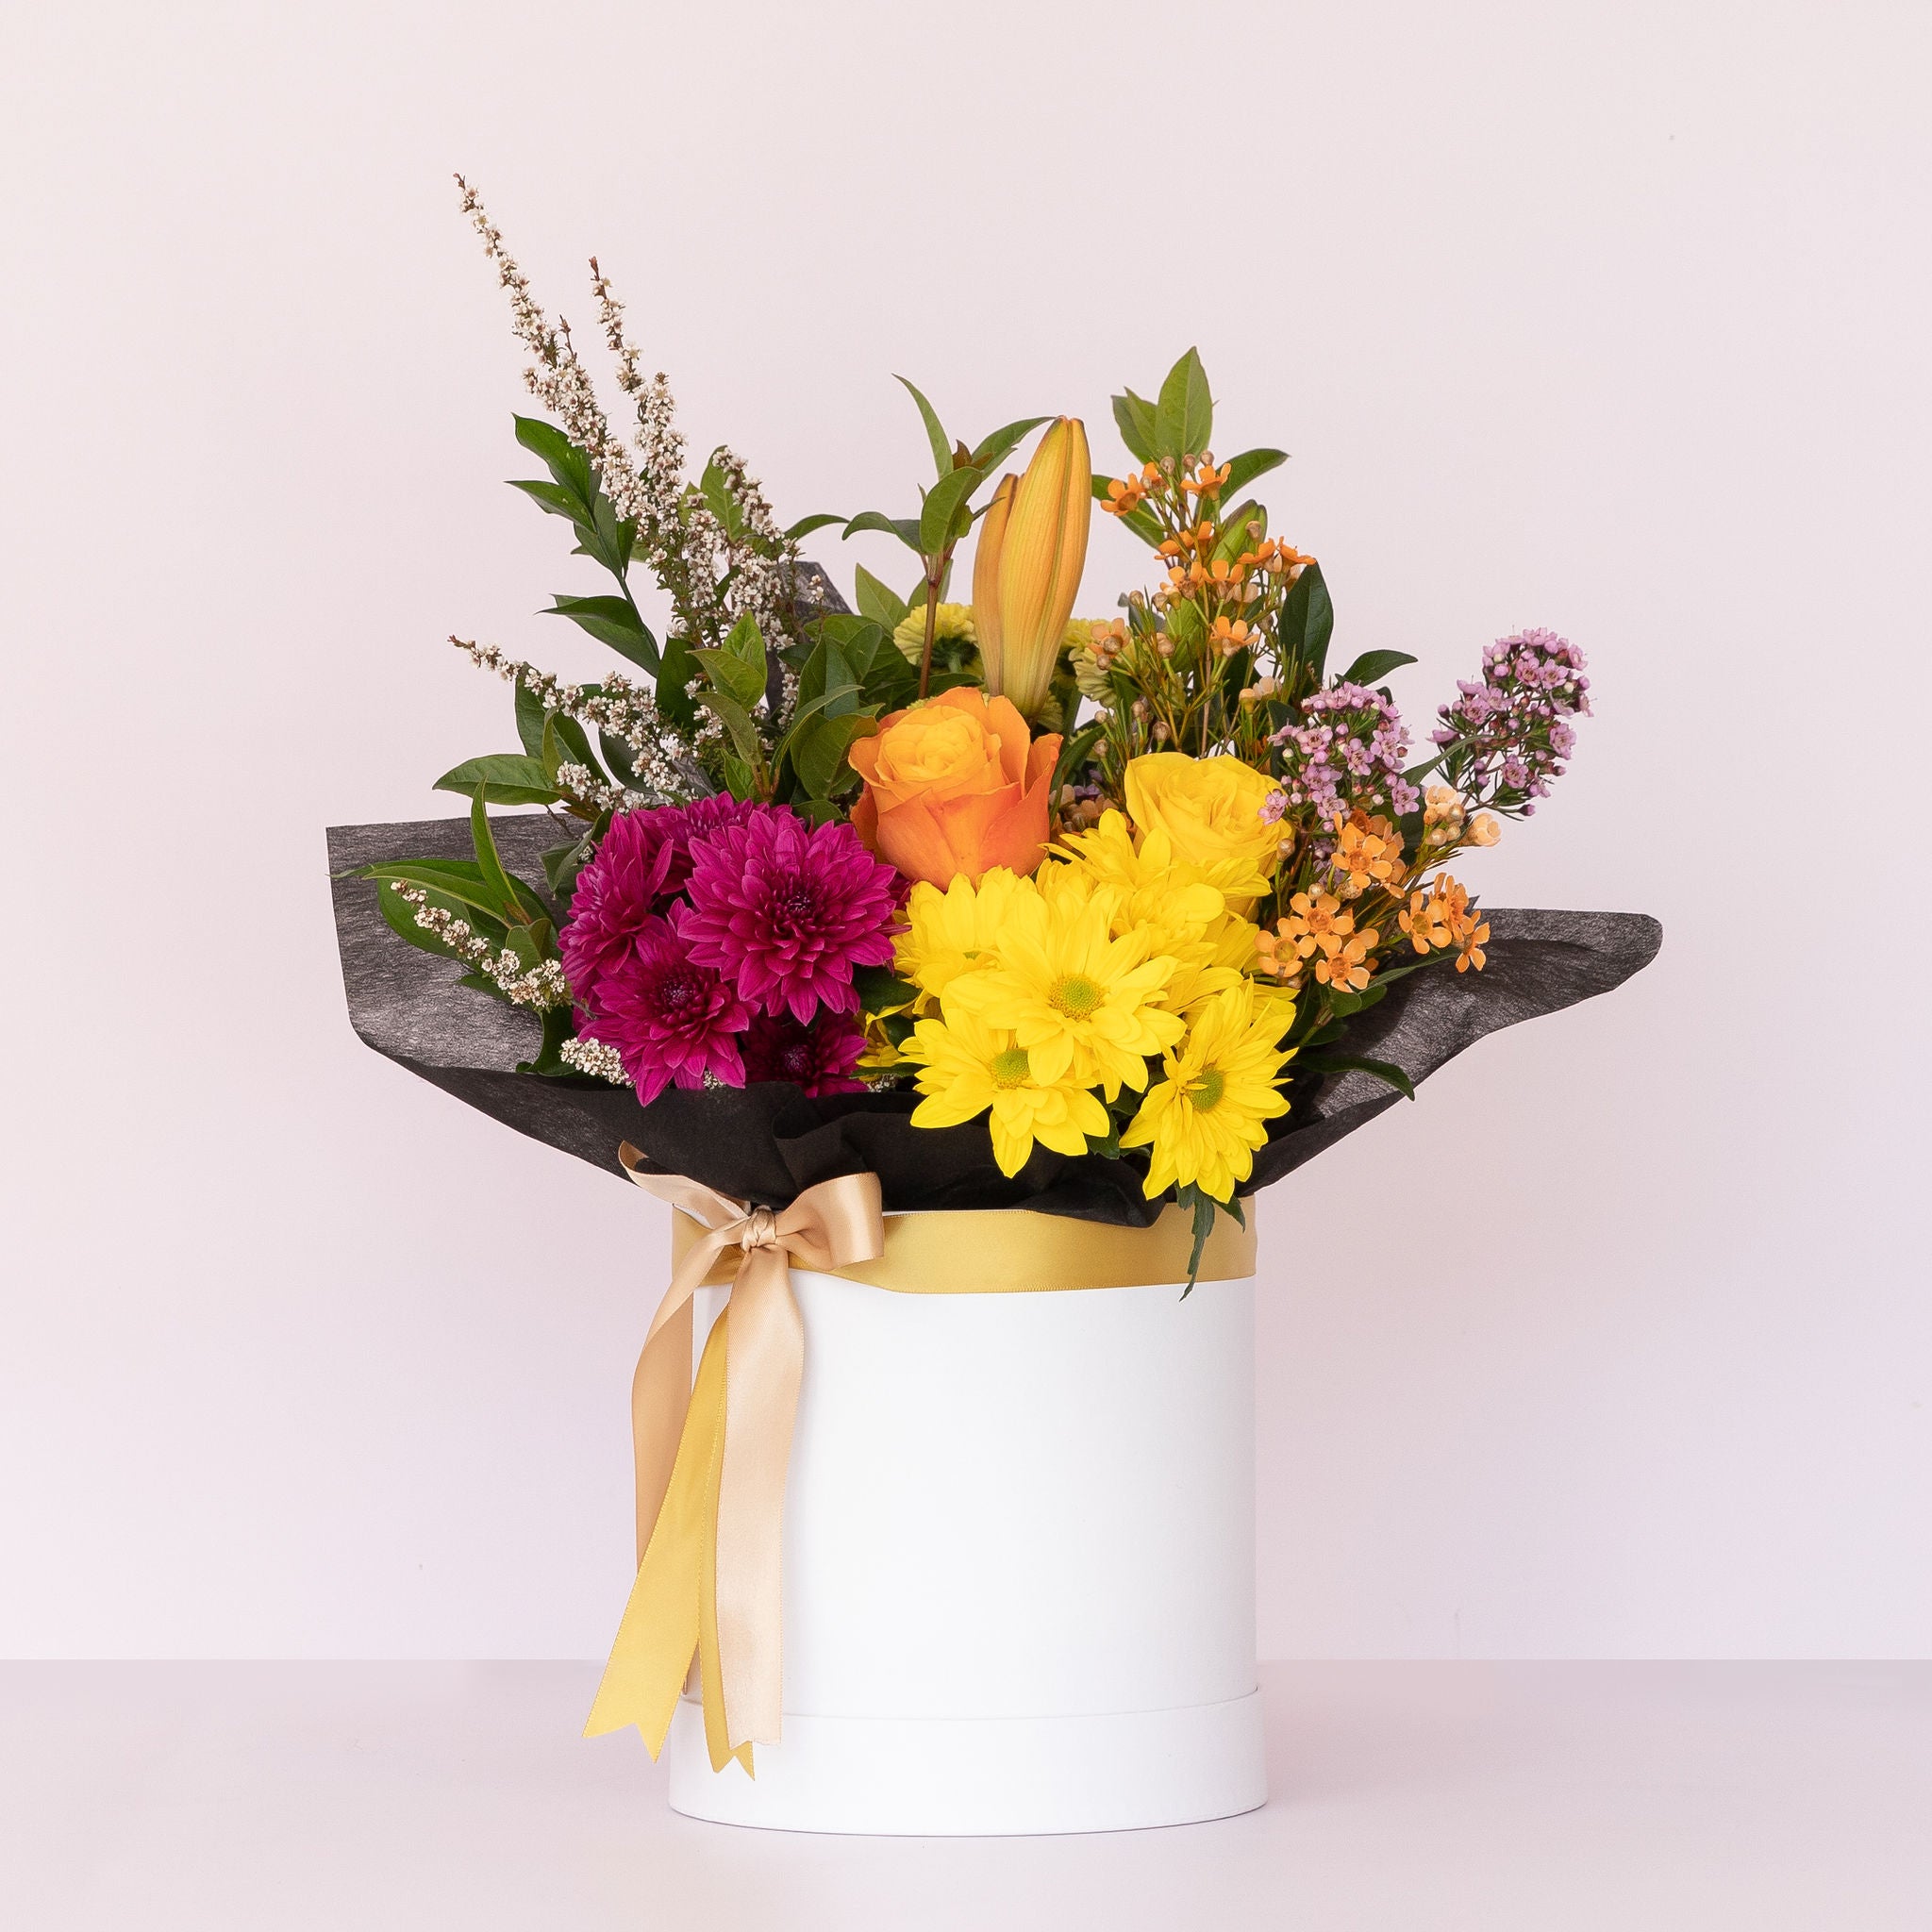 Flower Delivery Perth - Perth Florist - Fresh Blooms